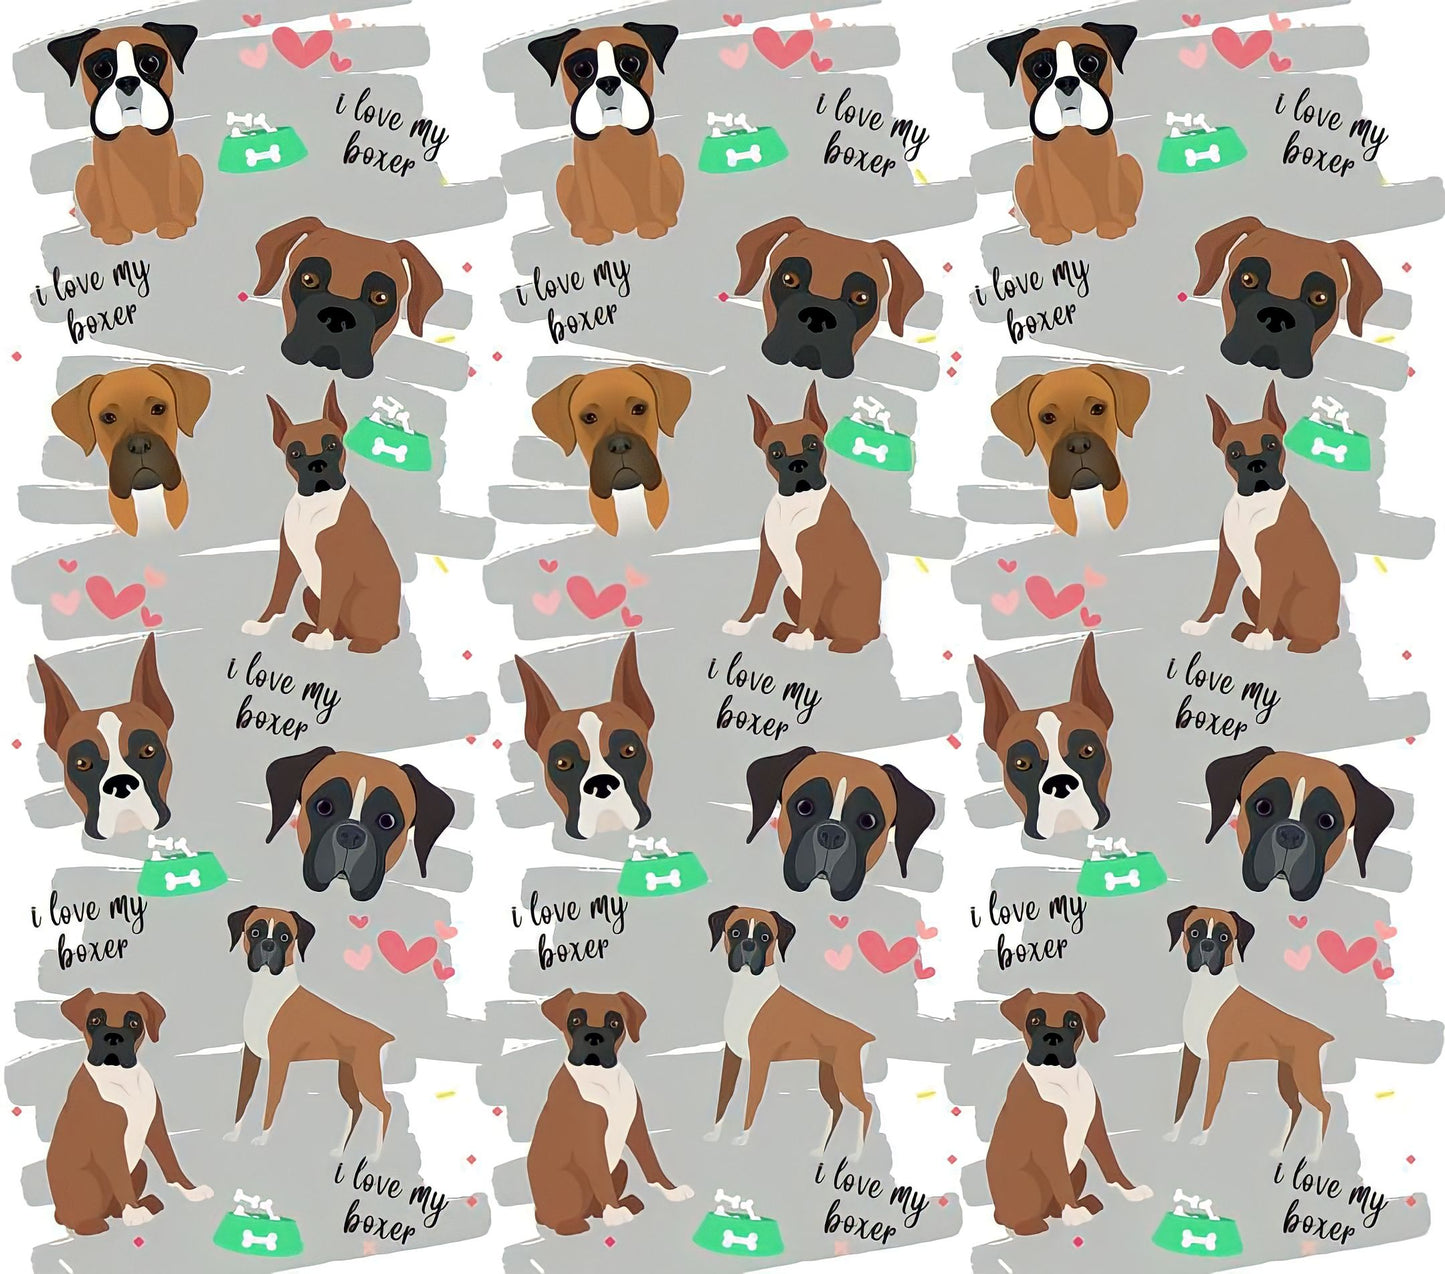 Boxer Breed Appreciation - Cartoon - "I Love My Boxer" - Assorted Colored Dogs w/ Silver & White Background - 20 Oz Sublimation Transfer